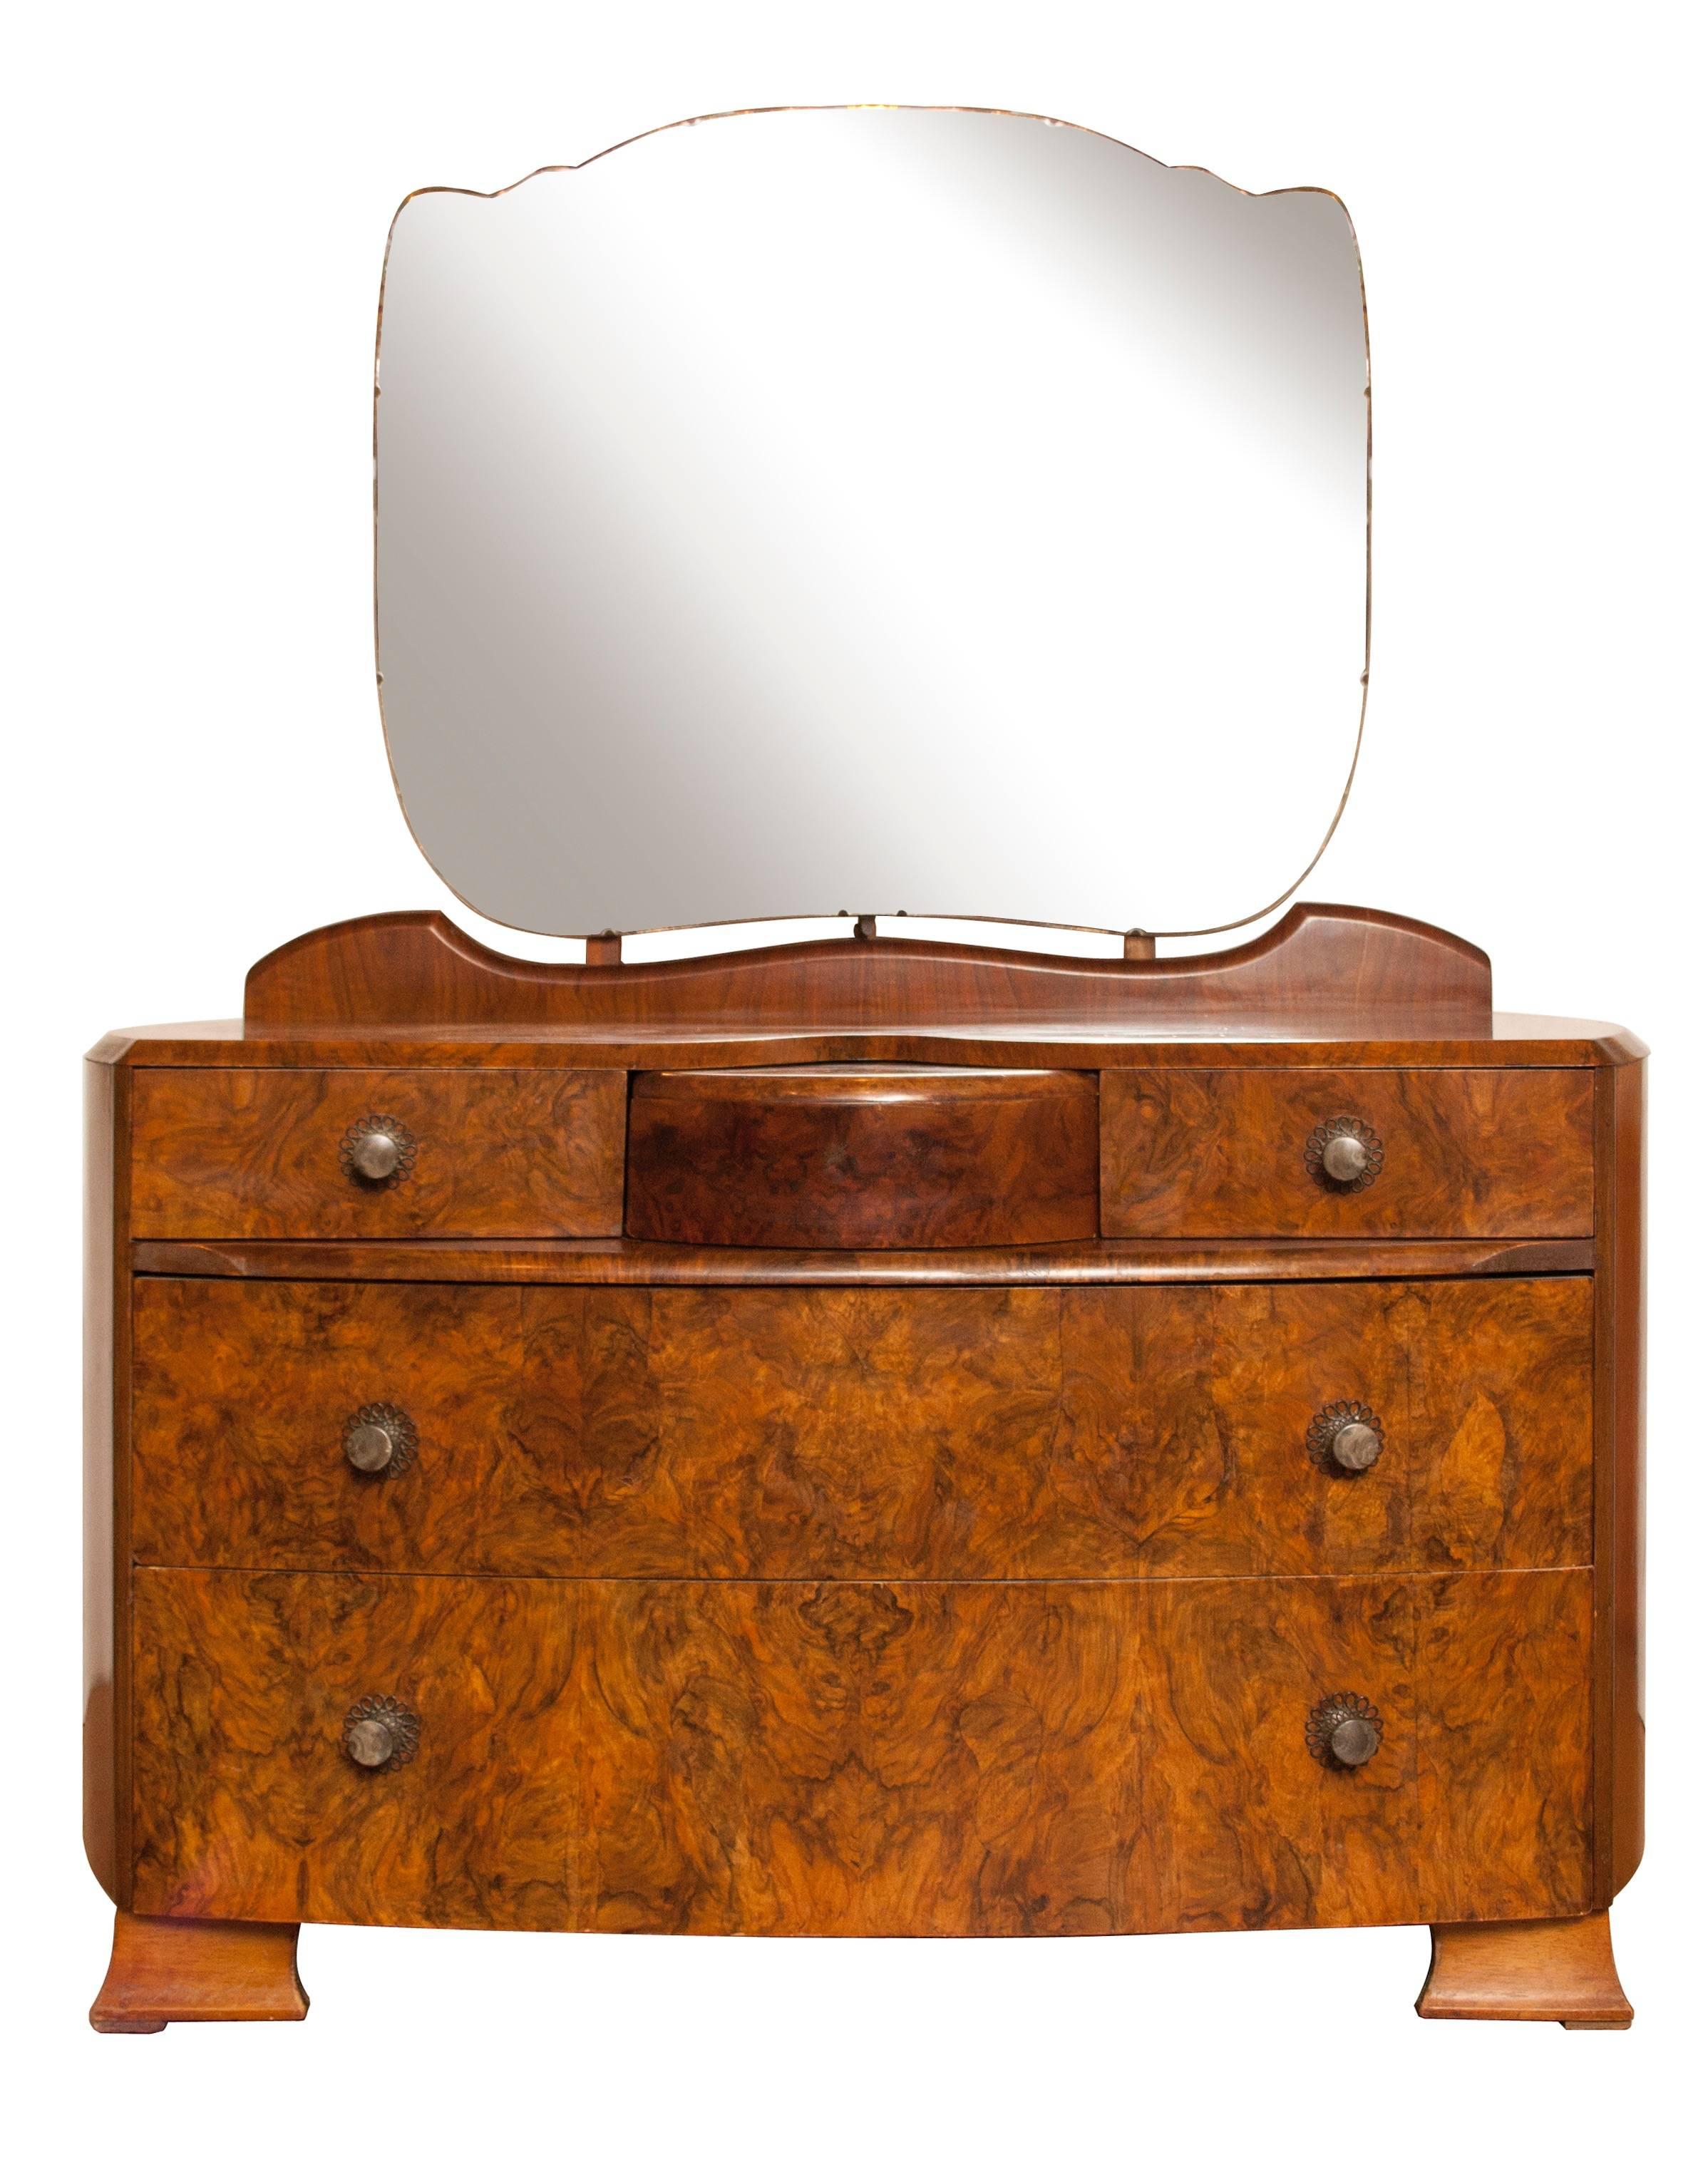 Art Deco dressing table.
Beautiful figured walnut Art Deco dressing table.
This pretty dressing table has a secret drawer in the middle which is operated by a lever up under the middle drawer.
Measures: H 149 cm, W 120 cm, D 56 cm.
British,